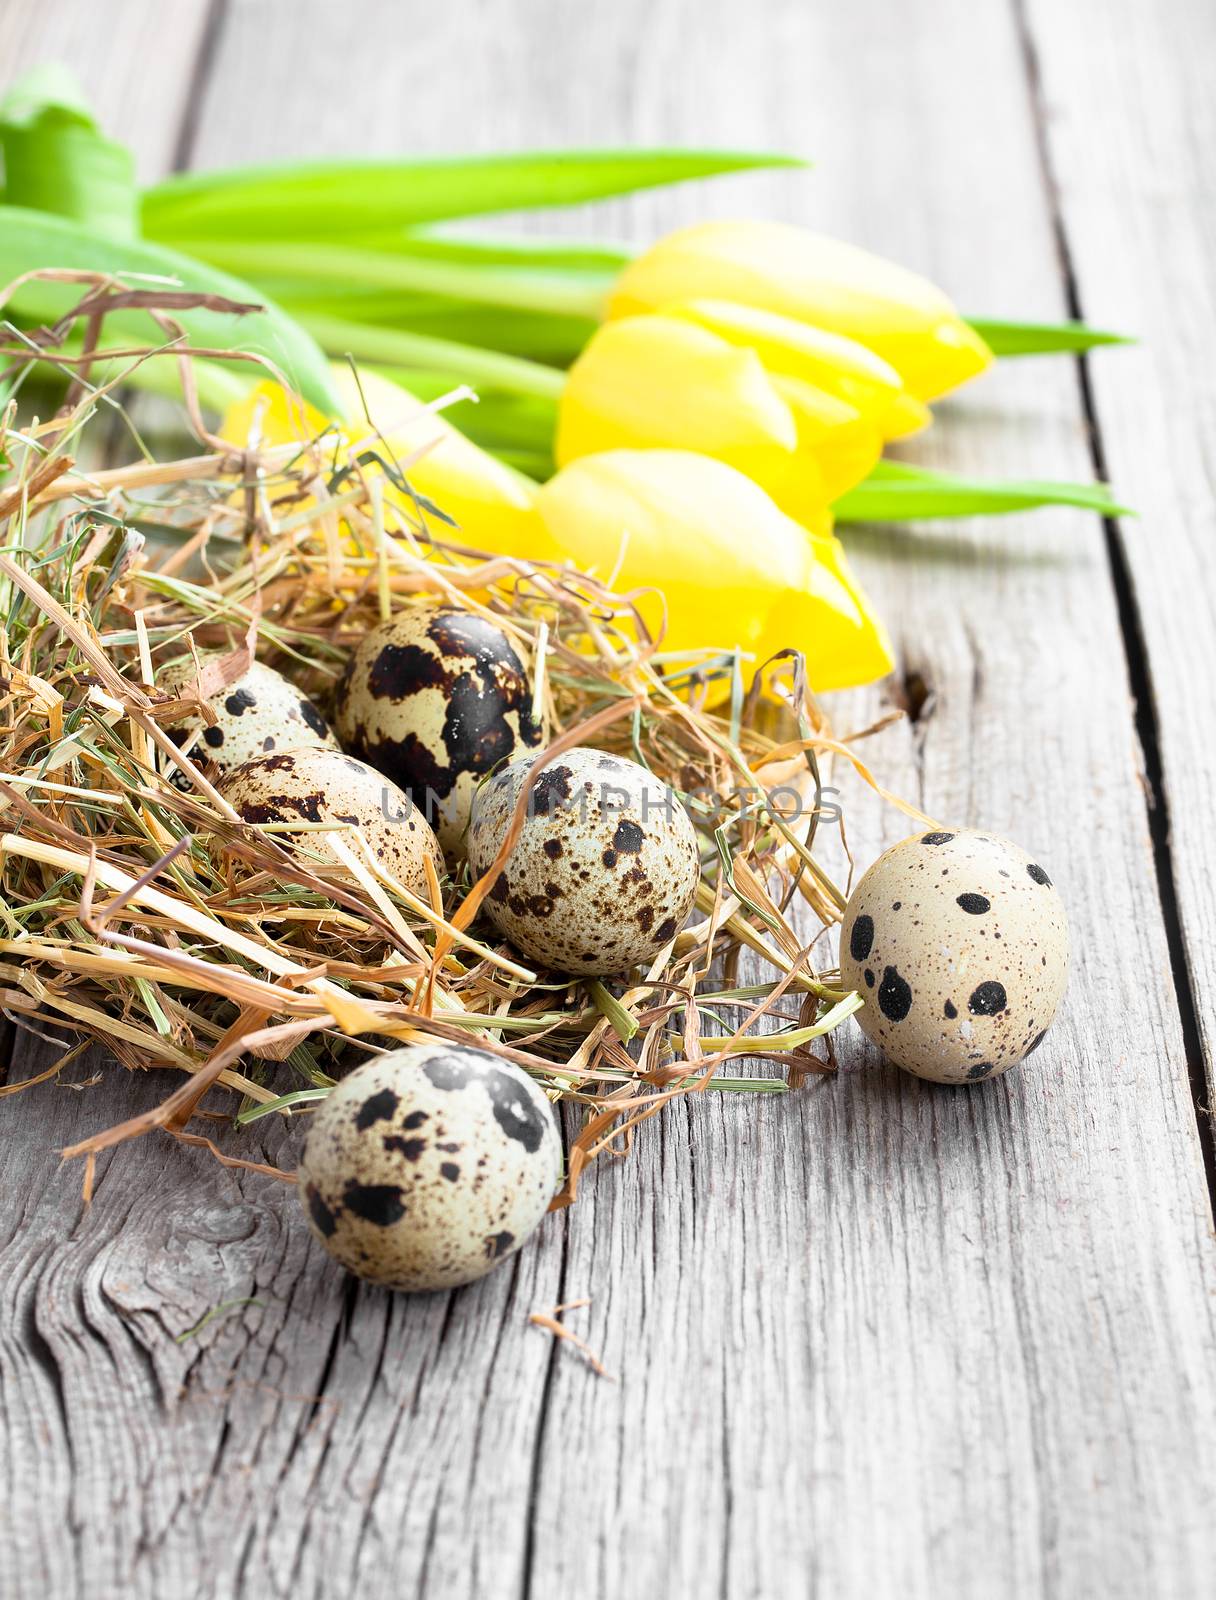 quail eggs with tulips on wooden background by motorolka